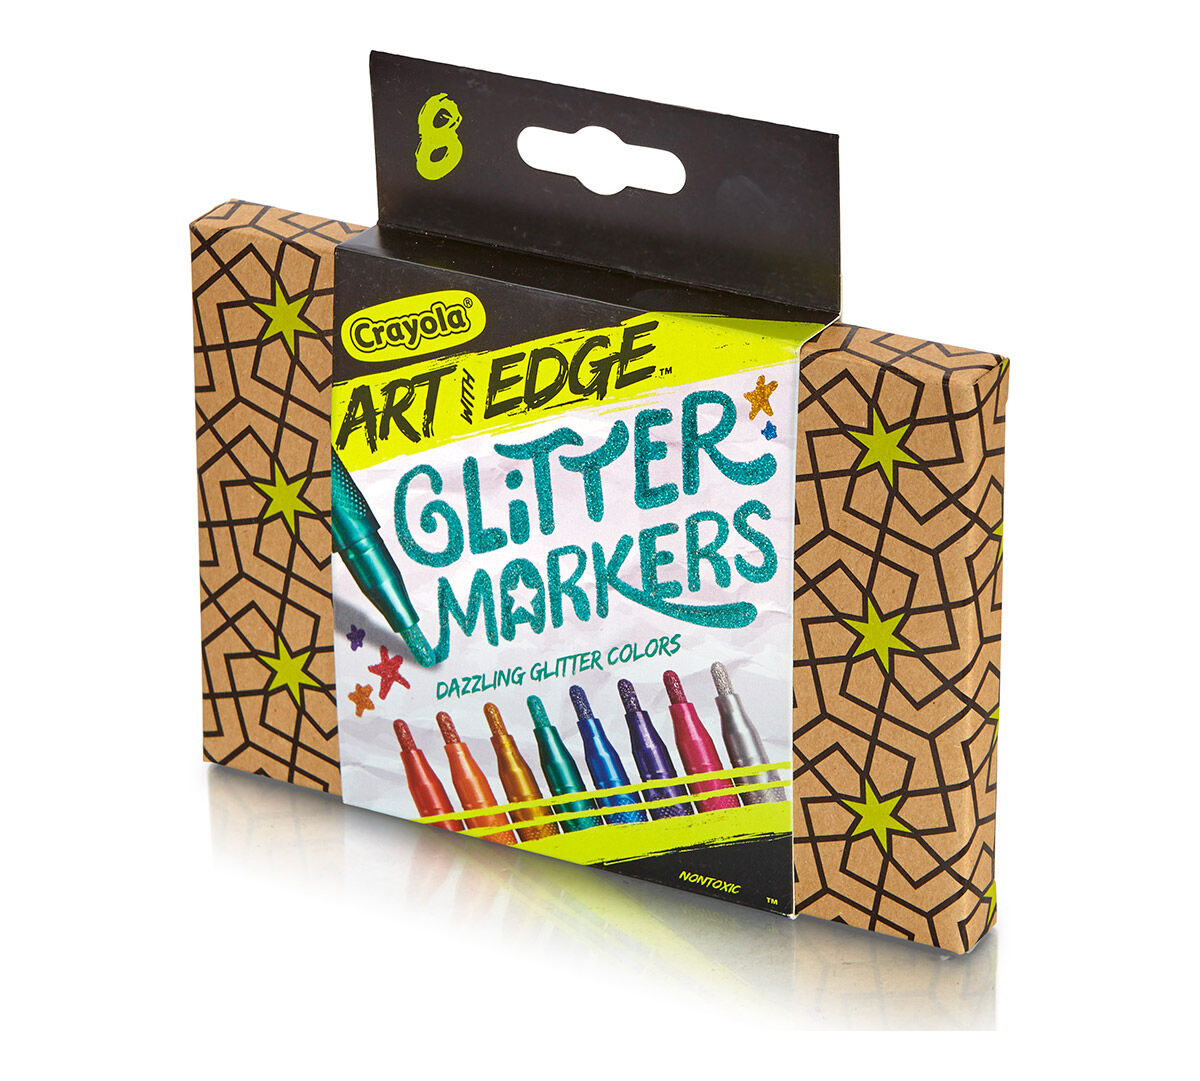 CRAYOLA ART WITH EDGE GLITTER MARKERS LOT OF 2 PACKAGES 